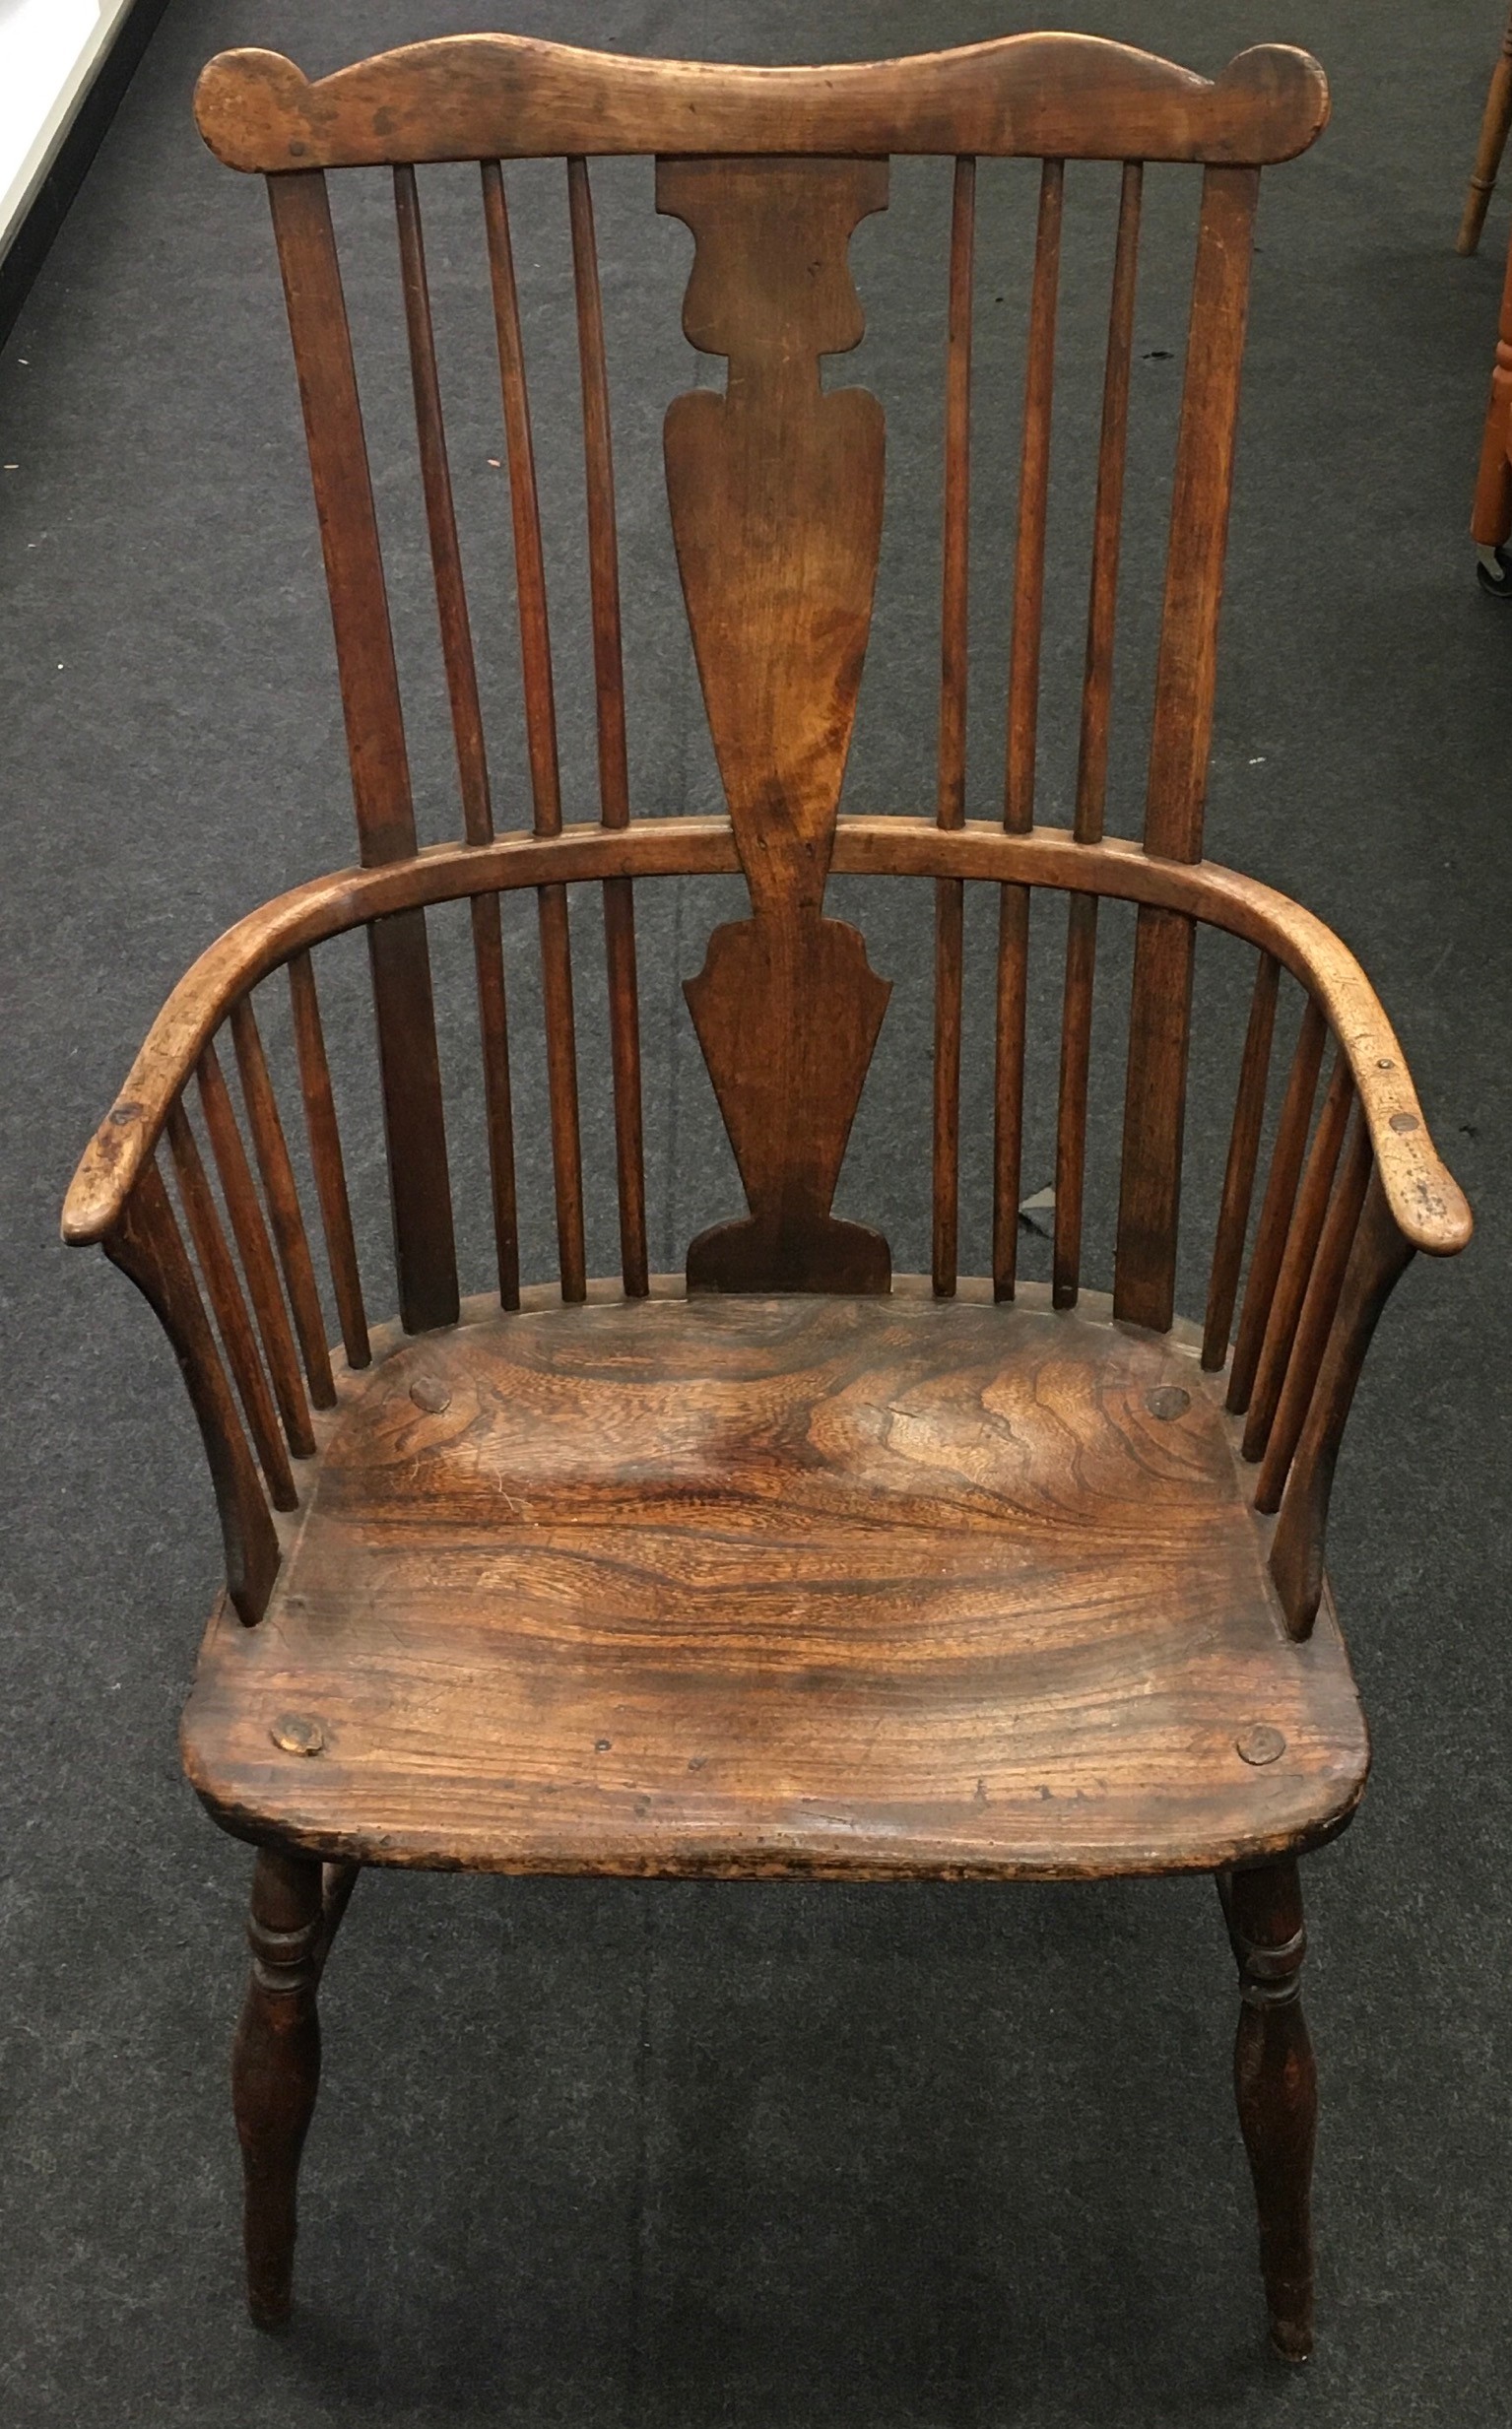 Antique Thames Valley Windsor armchair with elm seat.